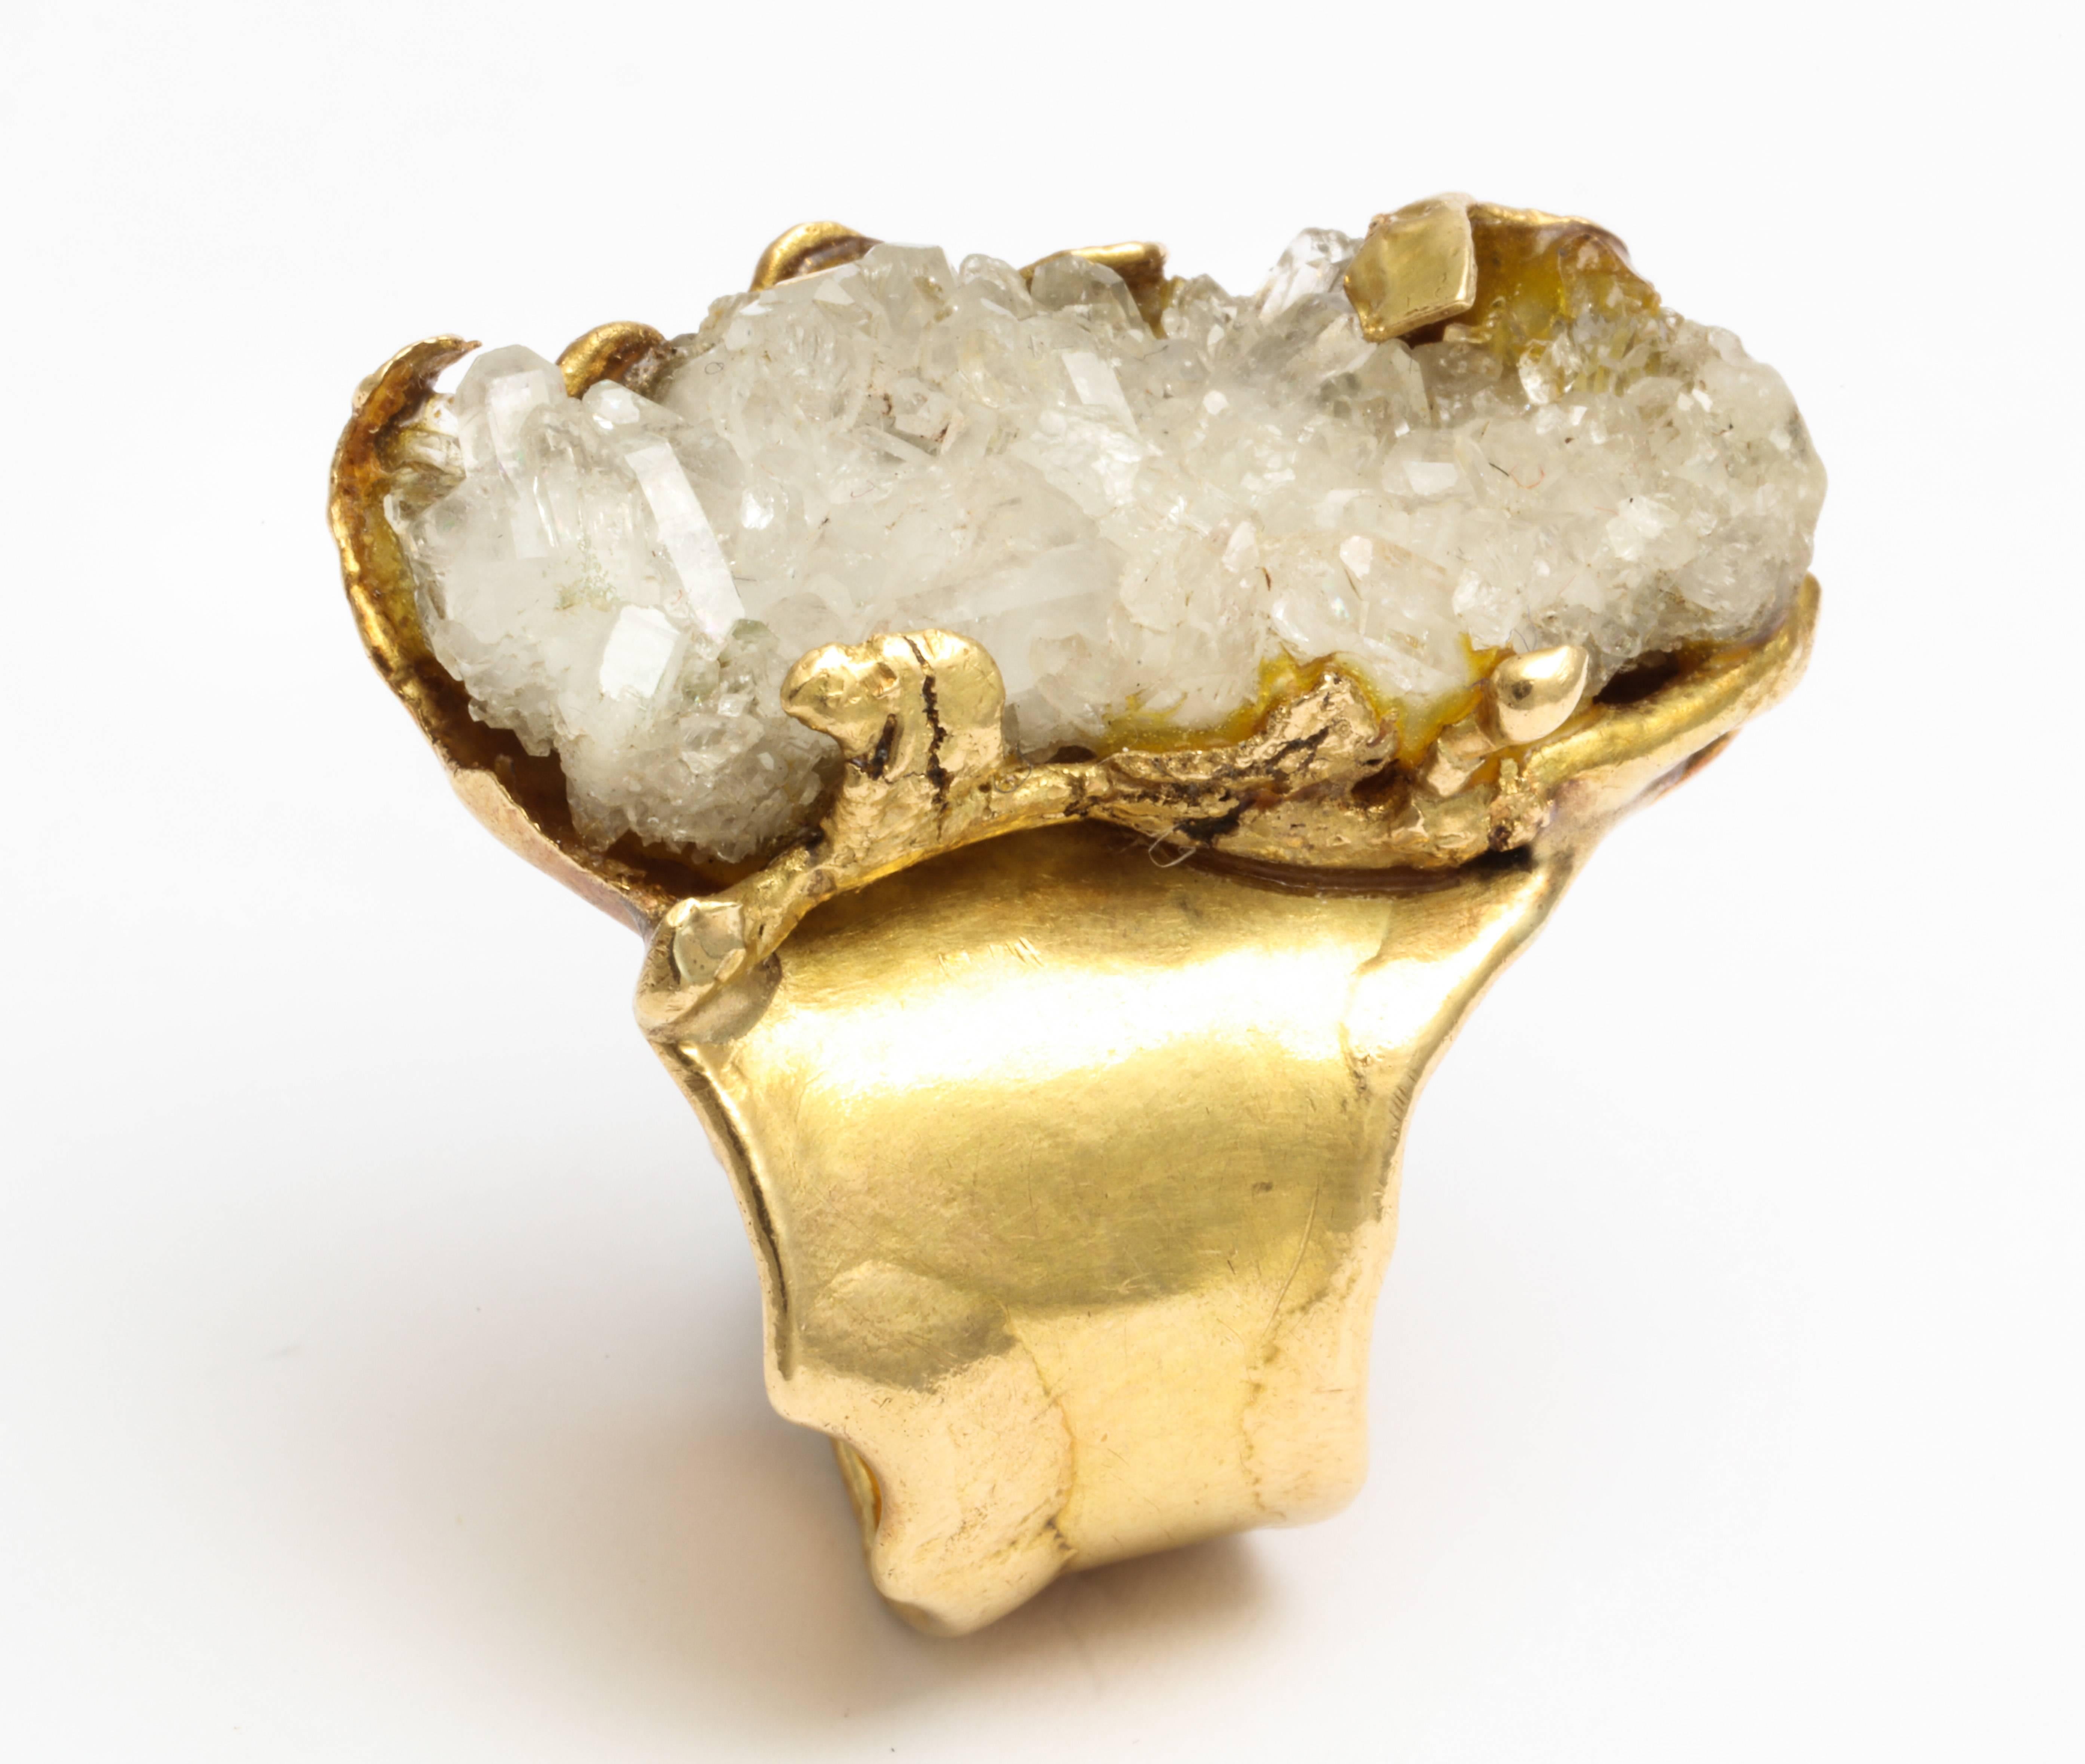 A unique and artistic brutalist ring by Roland Schad. A rutilated quartz stone is set in 18 kt gold artistic modernist design by a well known european jewelry designer.  
The ring is both stunning and comfortable... a statement piece.